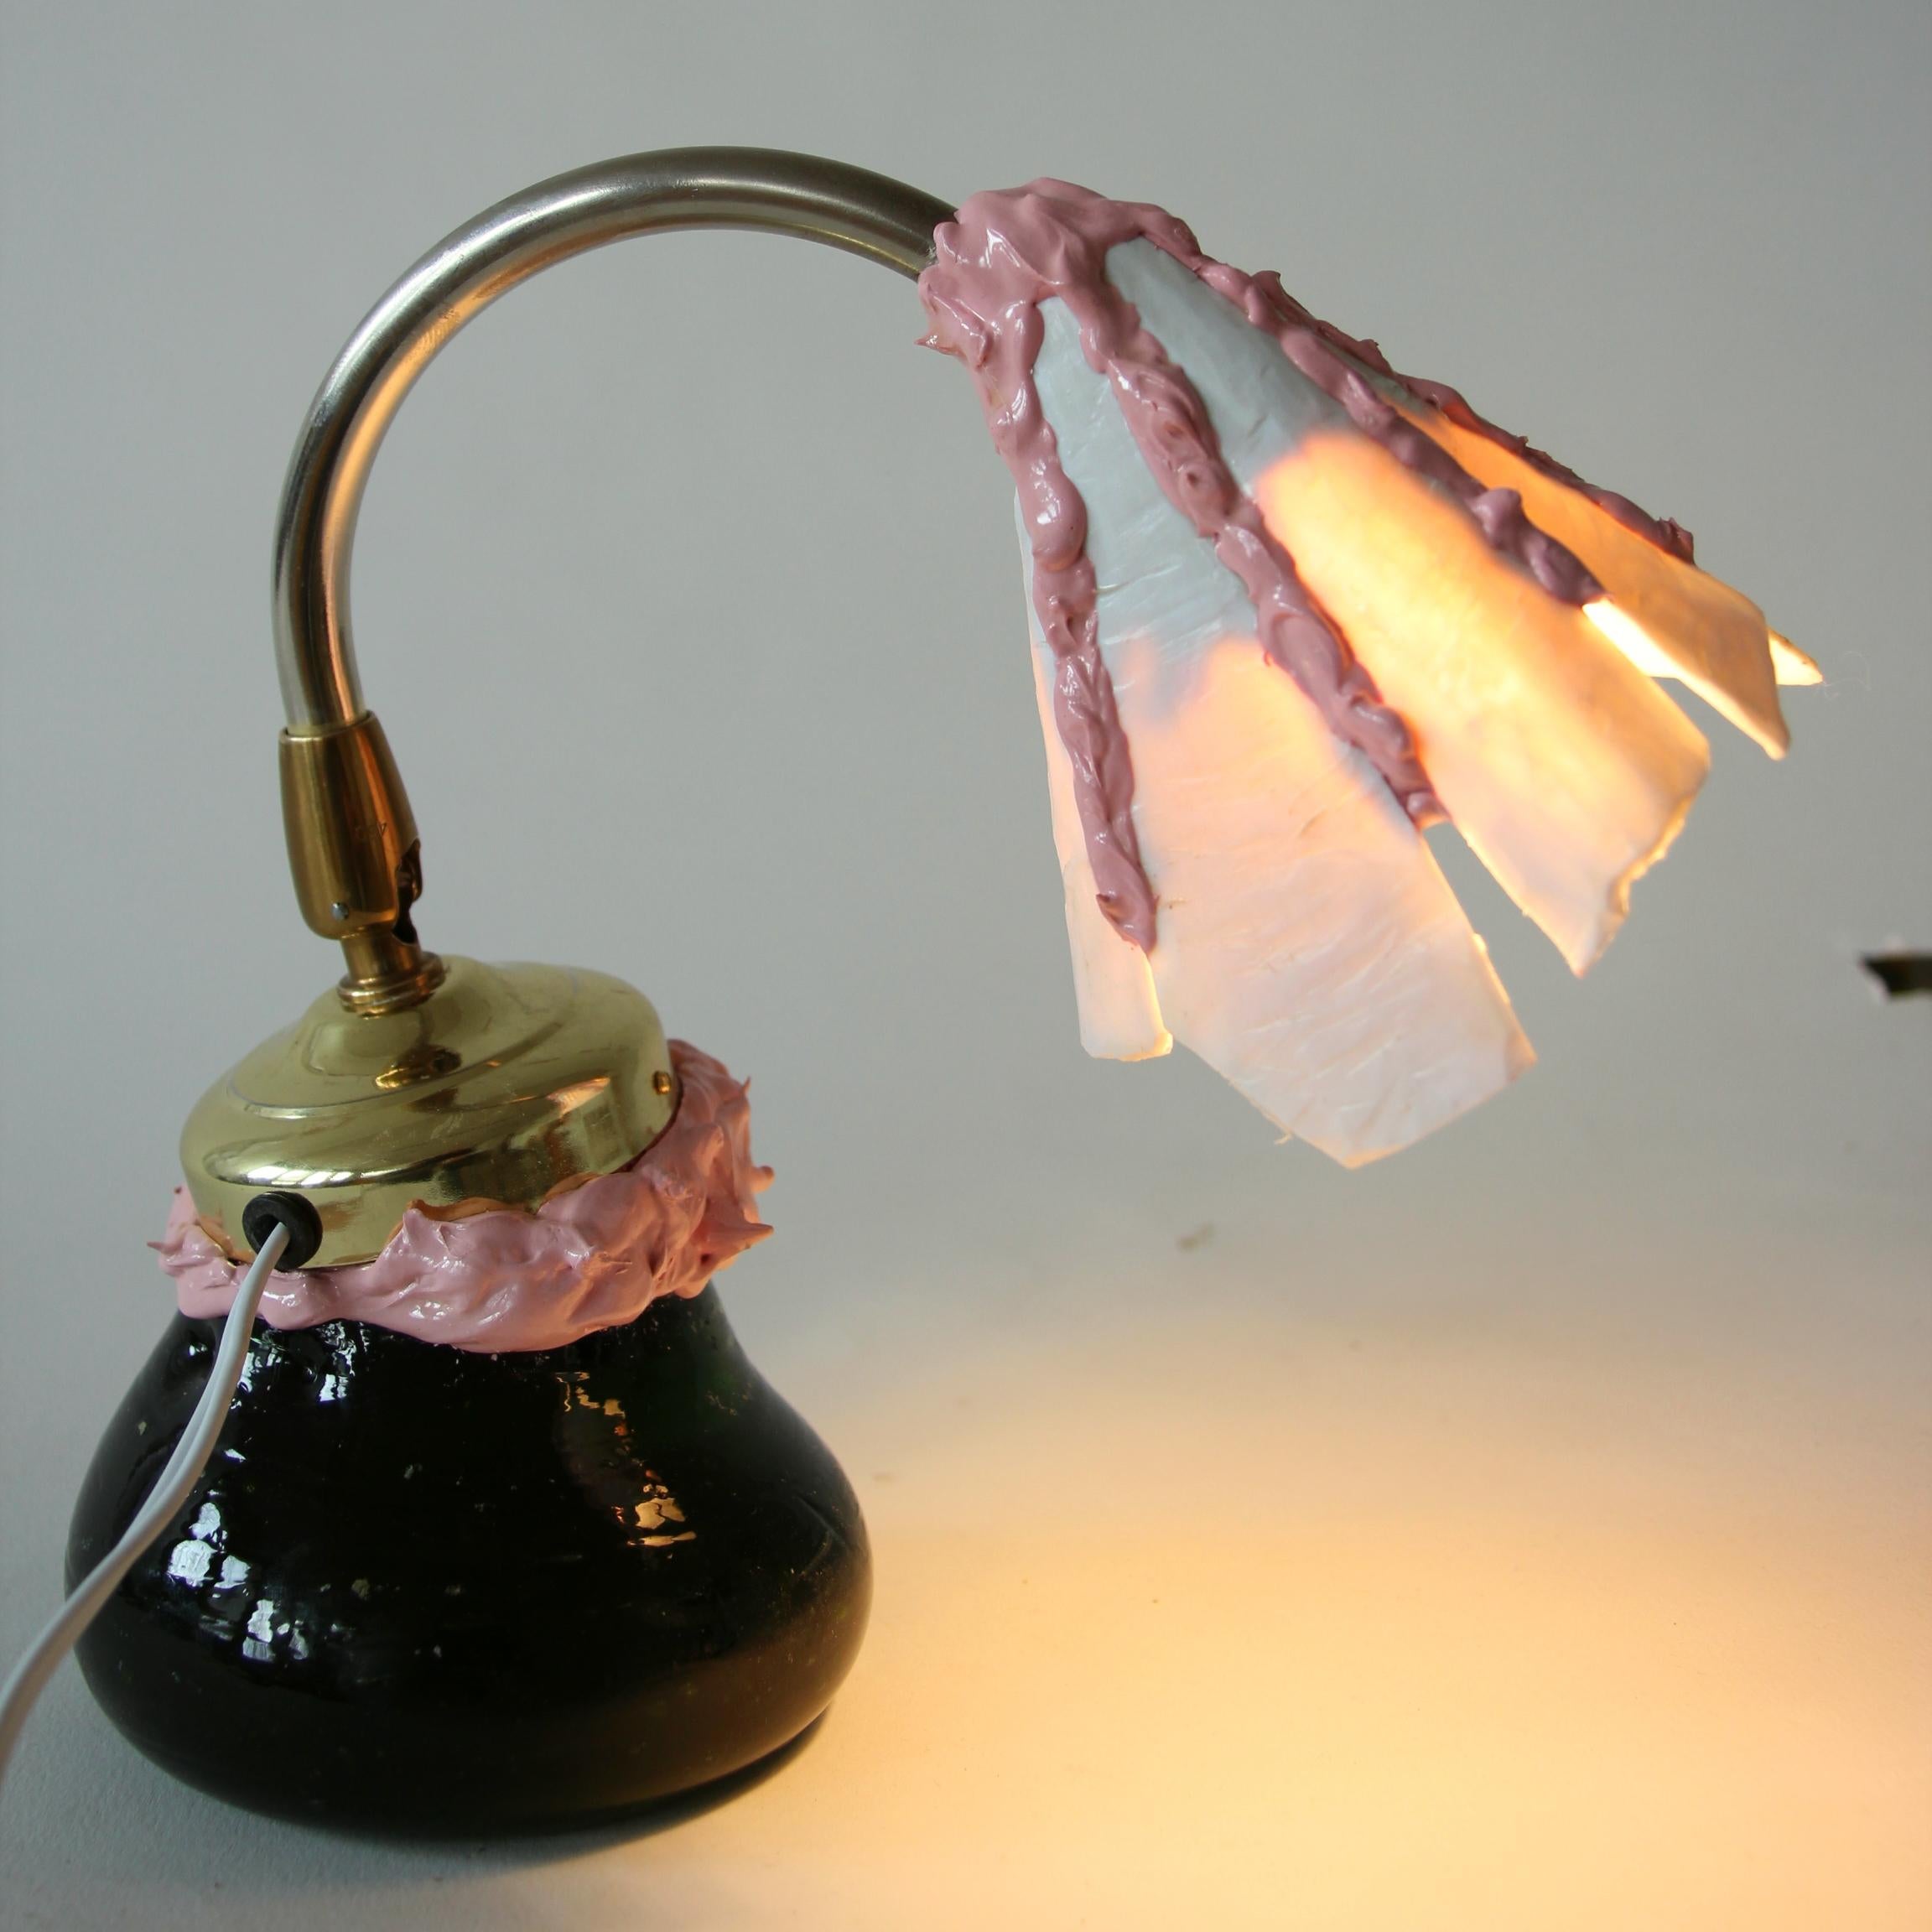 Small Unique Table Lamp from Found Objects by Designer Teemu Salonen, in Stock 2